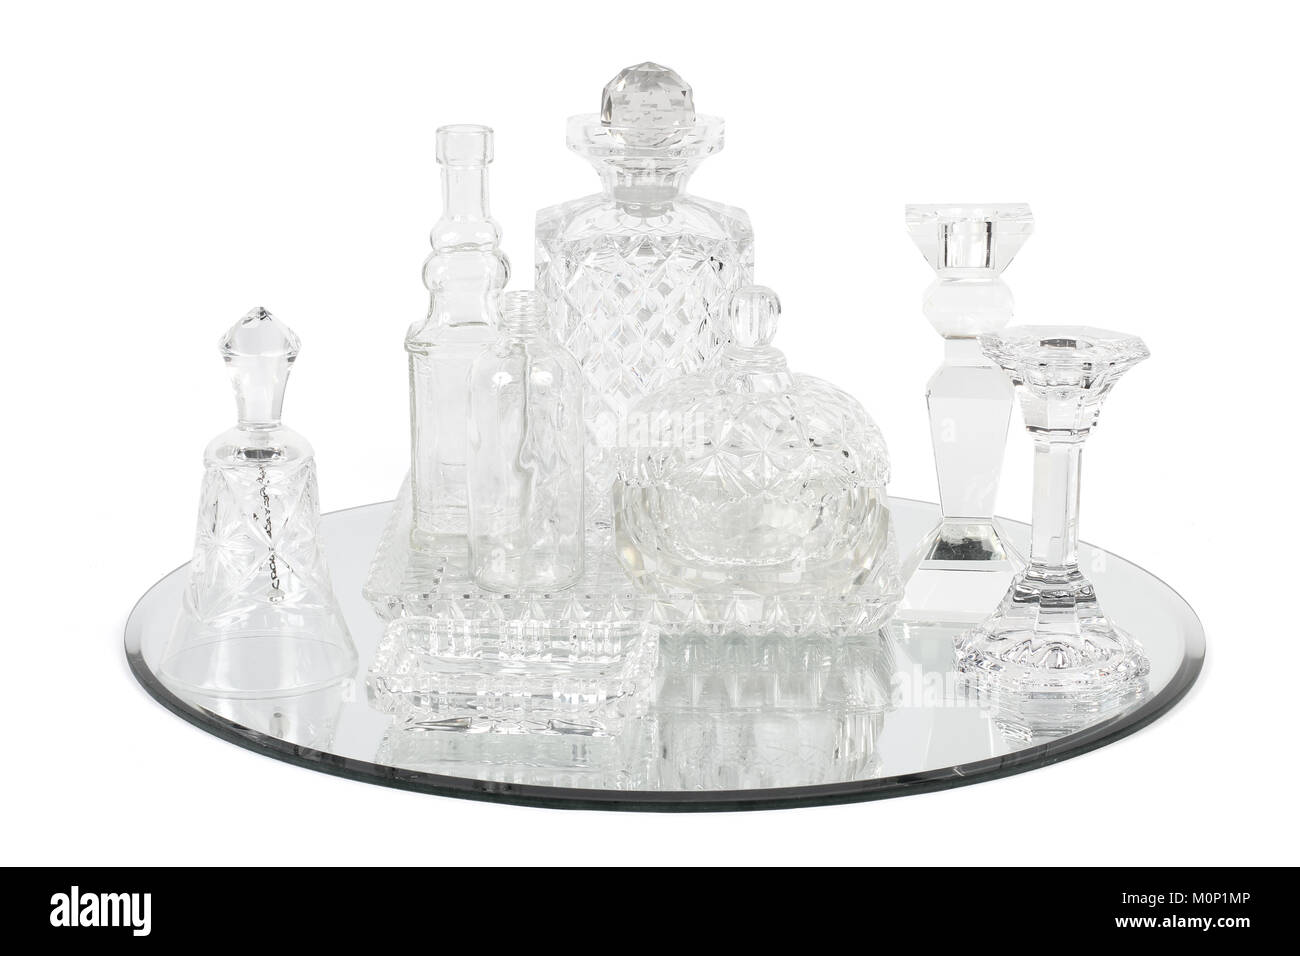 Crystal Decanters on Mirror Tray Stock Photo